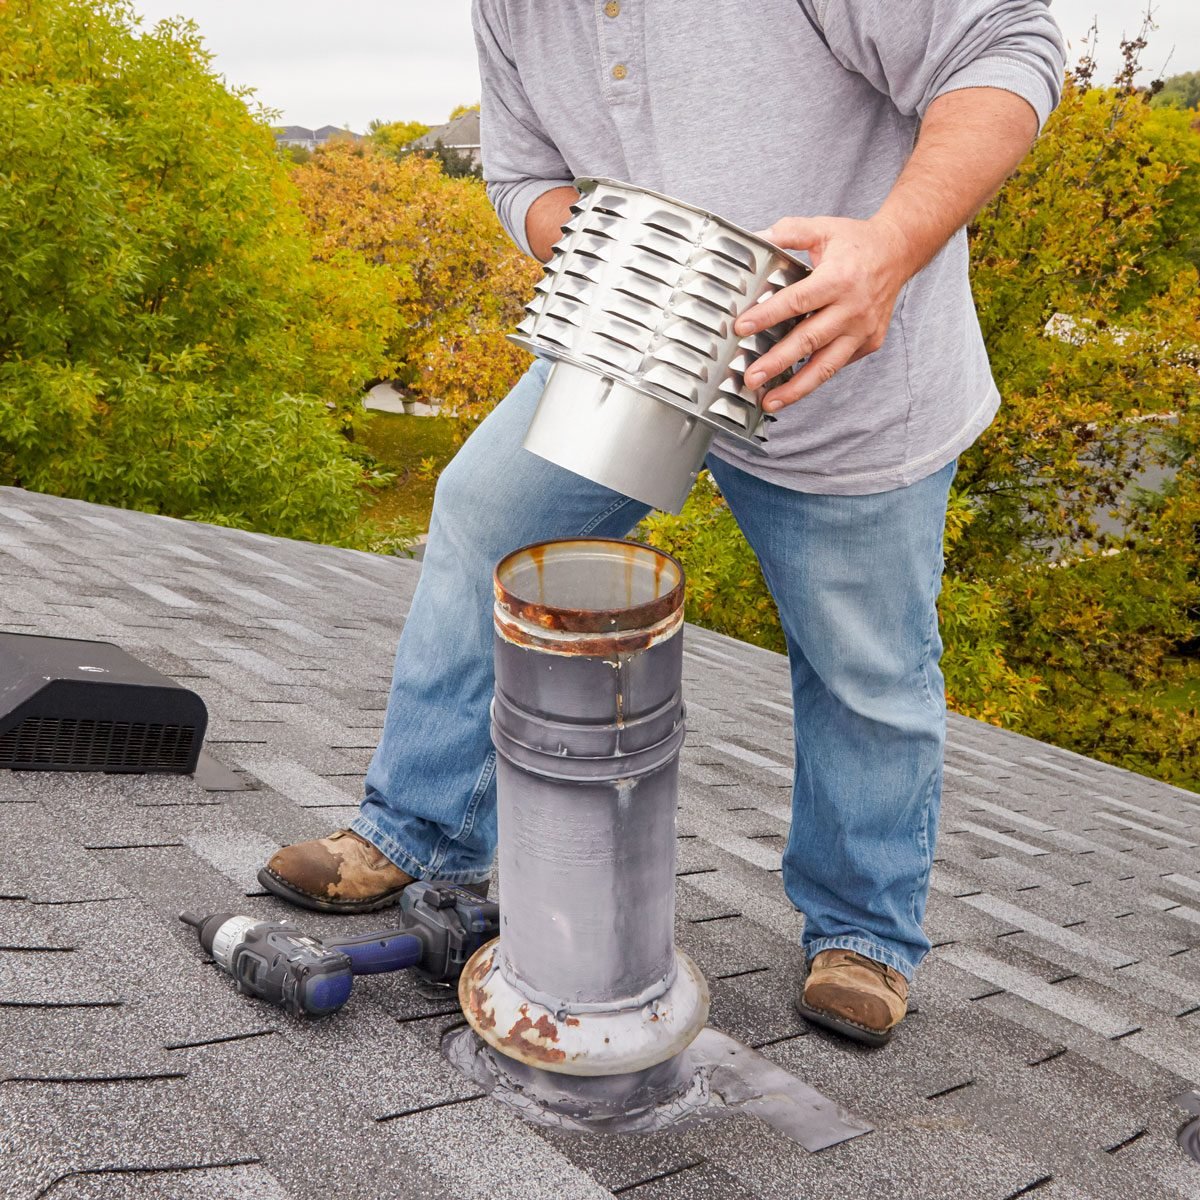 Chimney Cap Installation: A How-To Guide